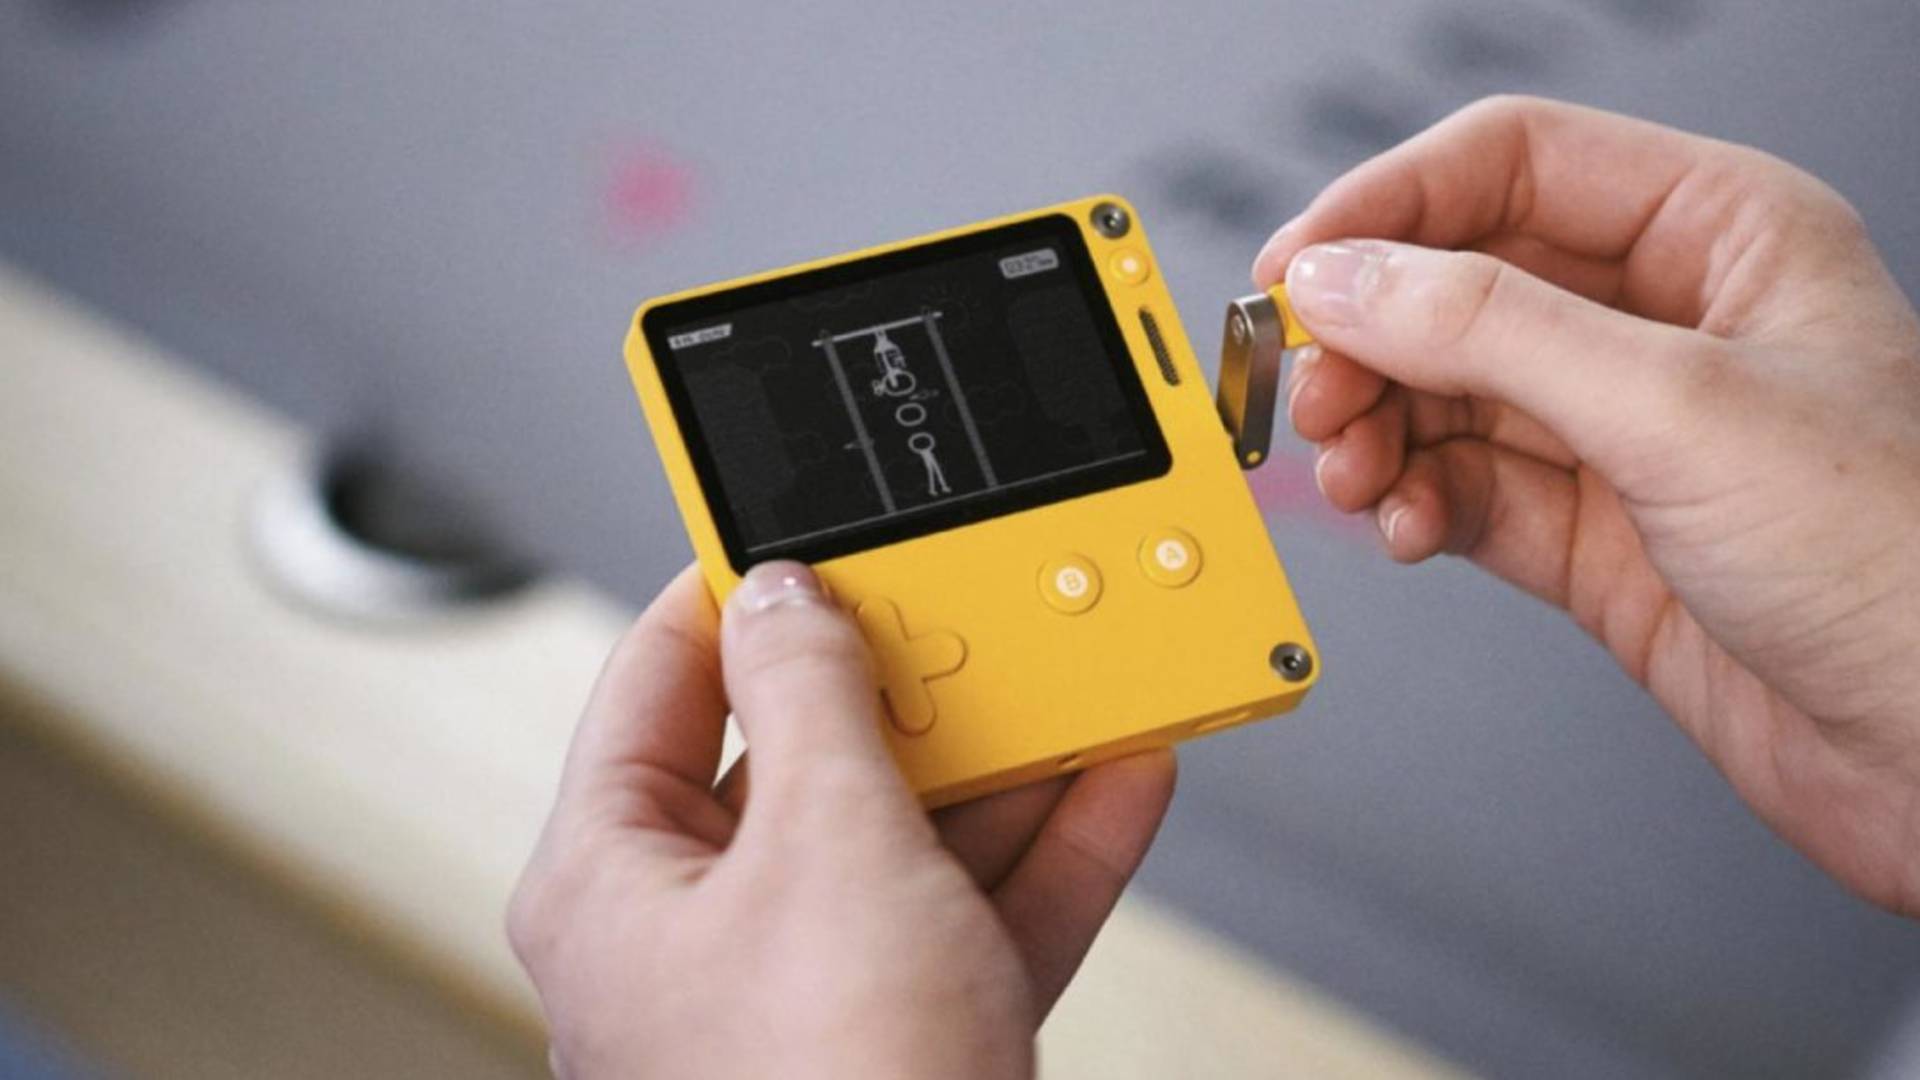 Playdate, that weird handheld console with the crank, will start pre-orders in July